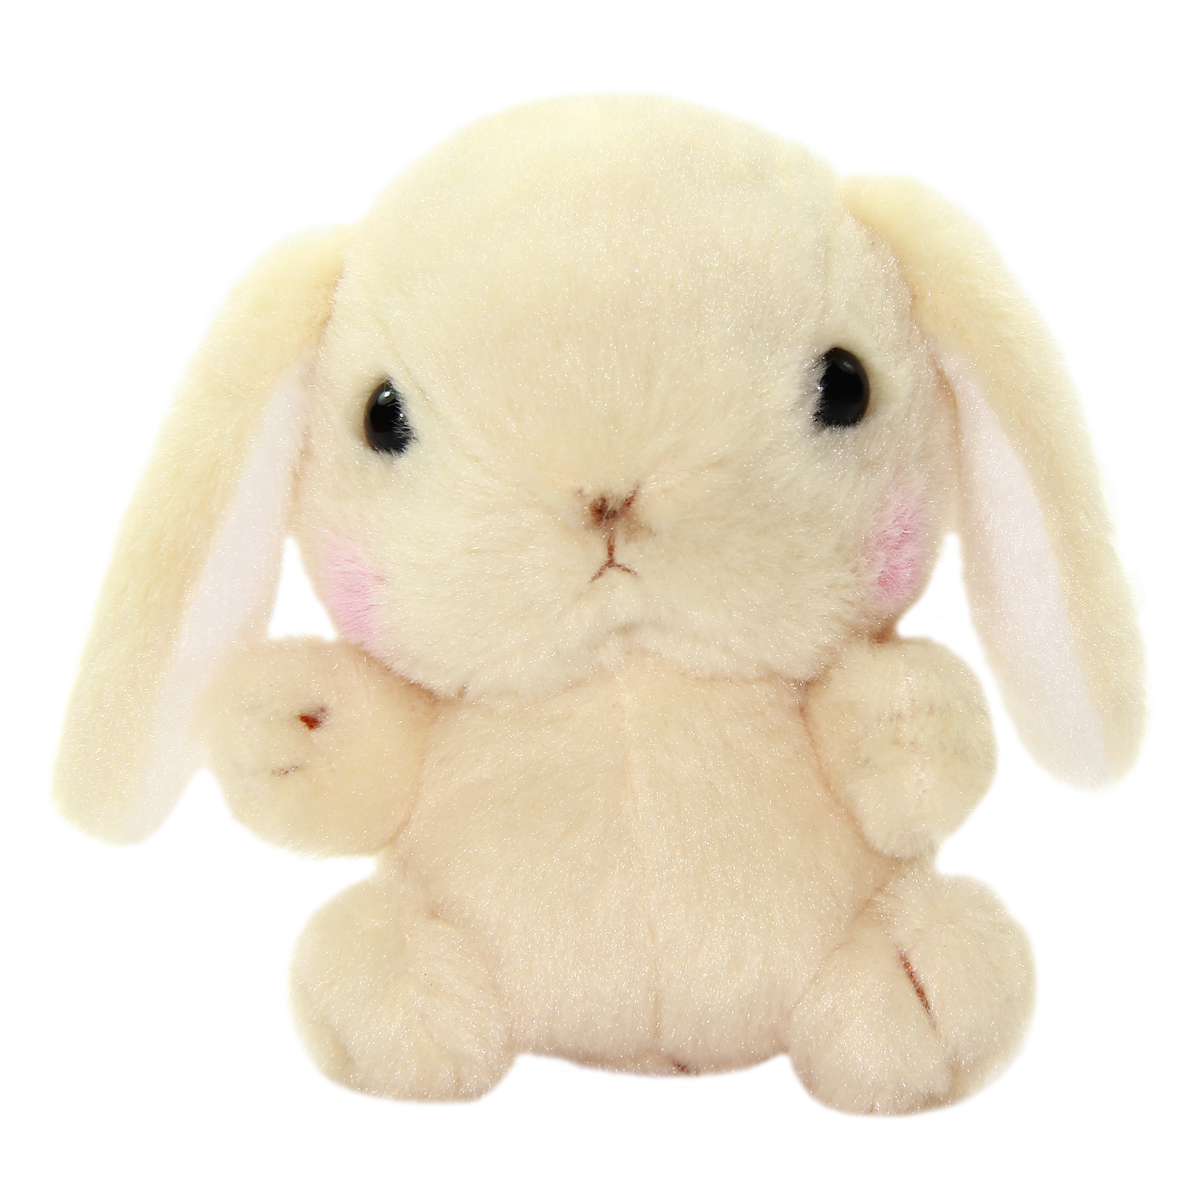 Amuse Gathering Bunny Plushie Collection Cute Stuffed Animal Toy Beige 4 Inches